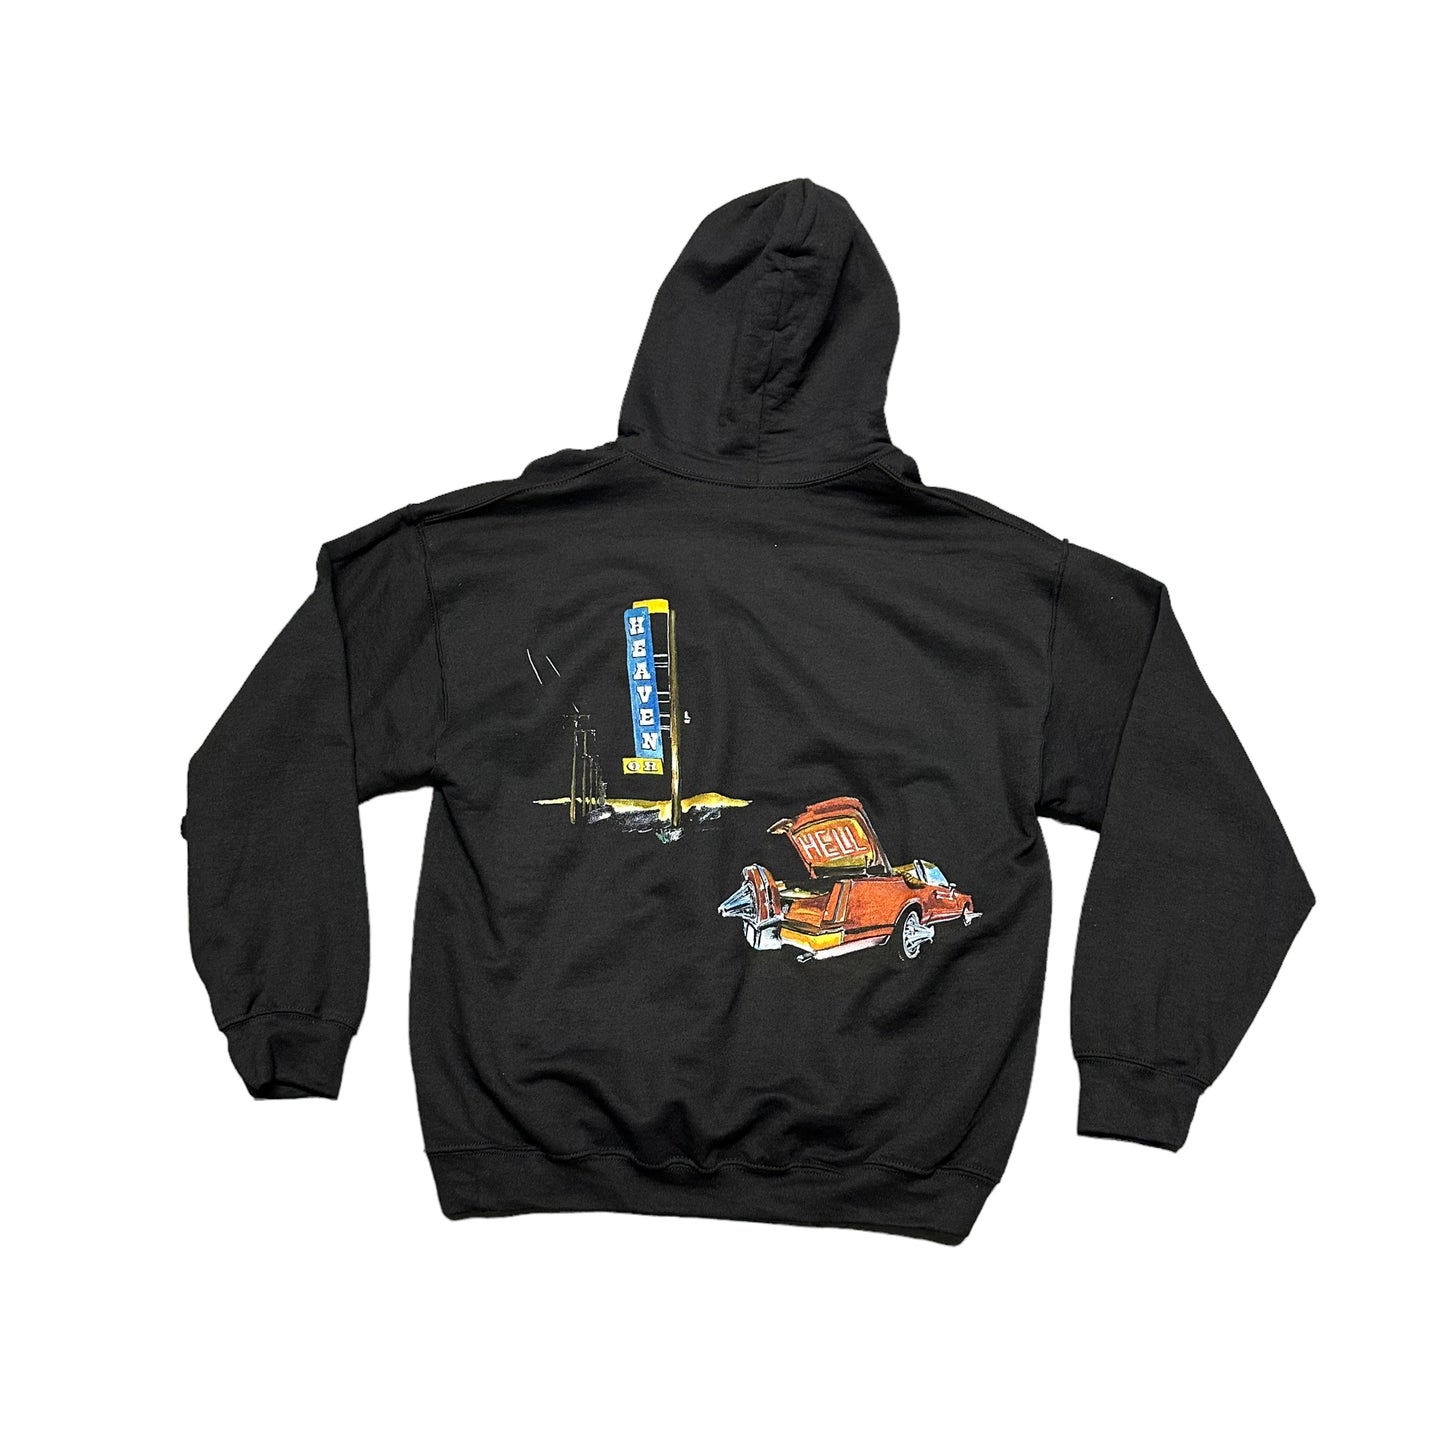 Don Toliver Heaven or Hell Black Hoodie